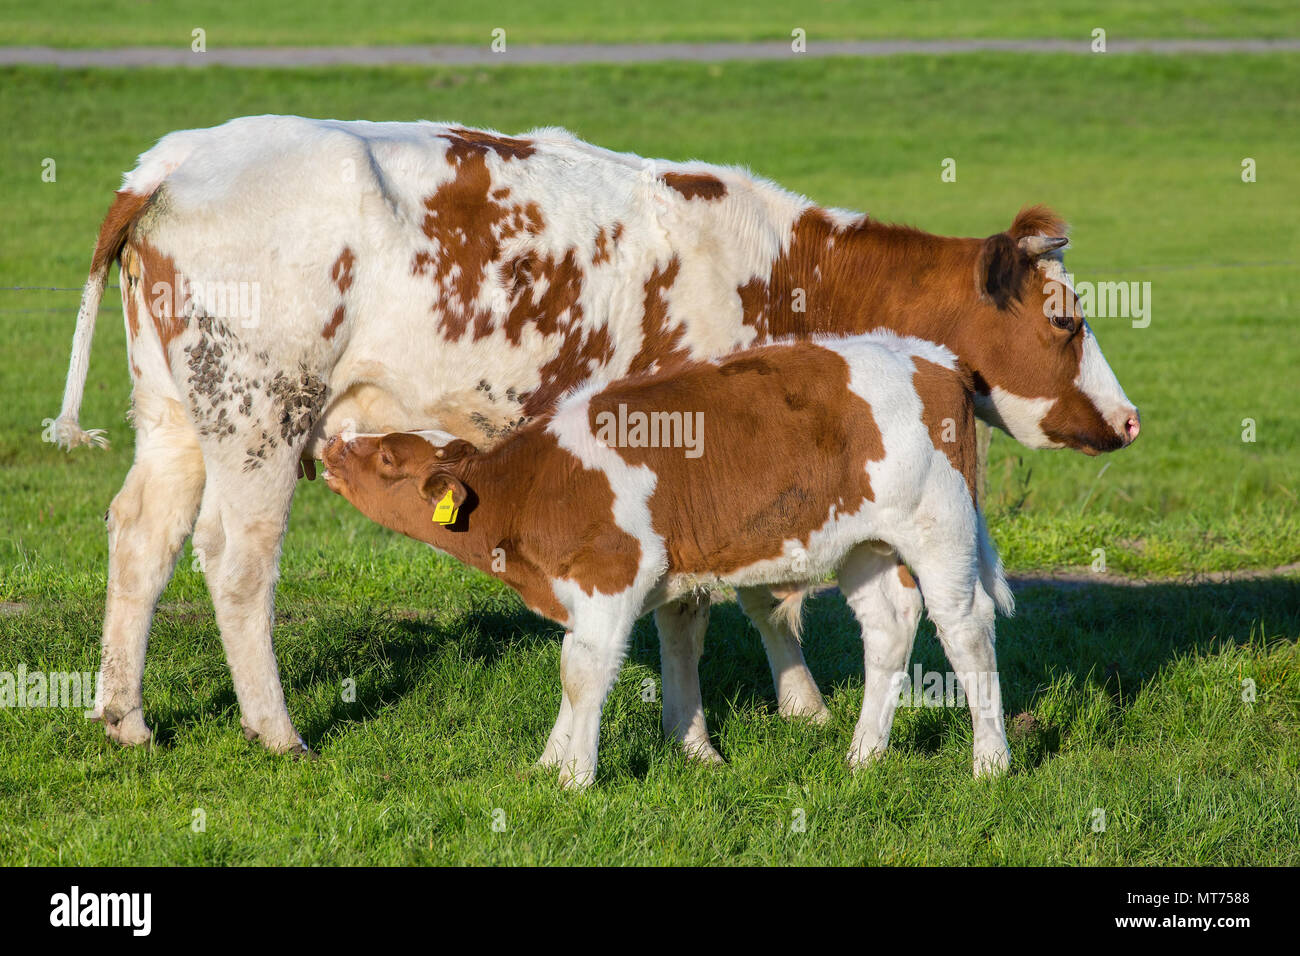 Brown with white calf drinking milk from mother cow in green meadow Stock Photo